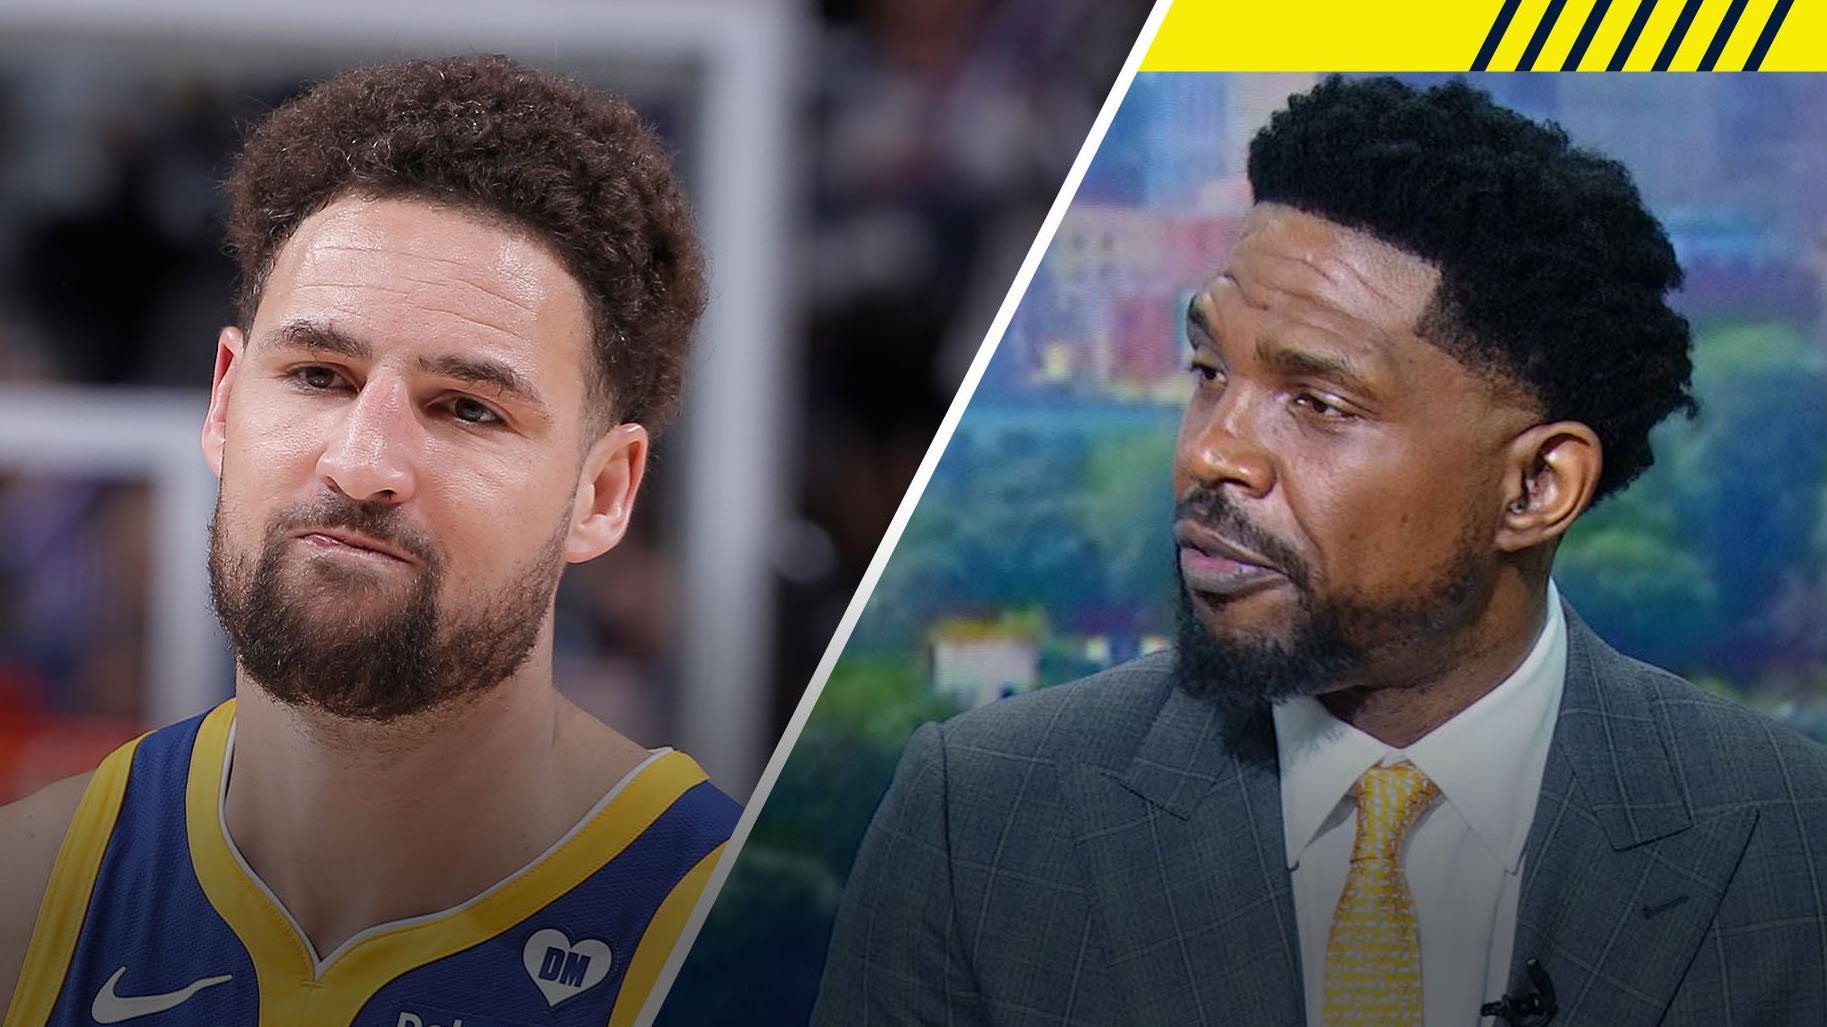 Haslem: Could be best for Klay and Warriors to move on